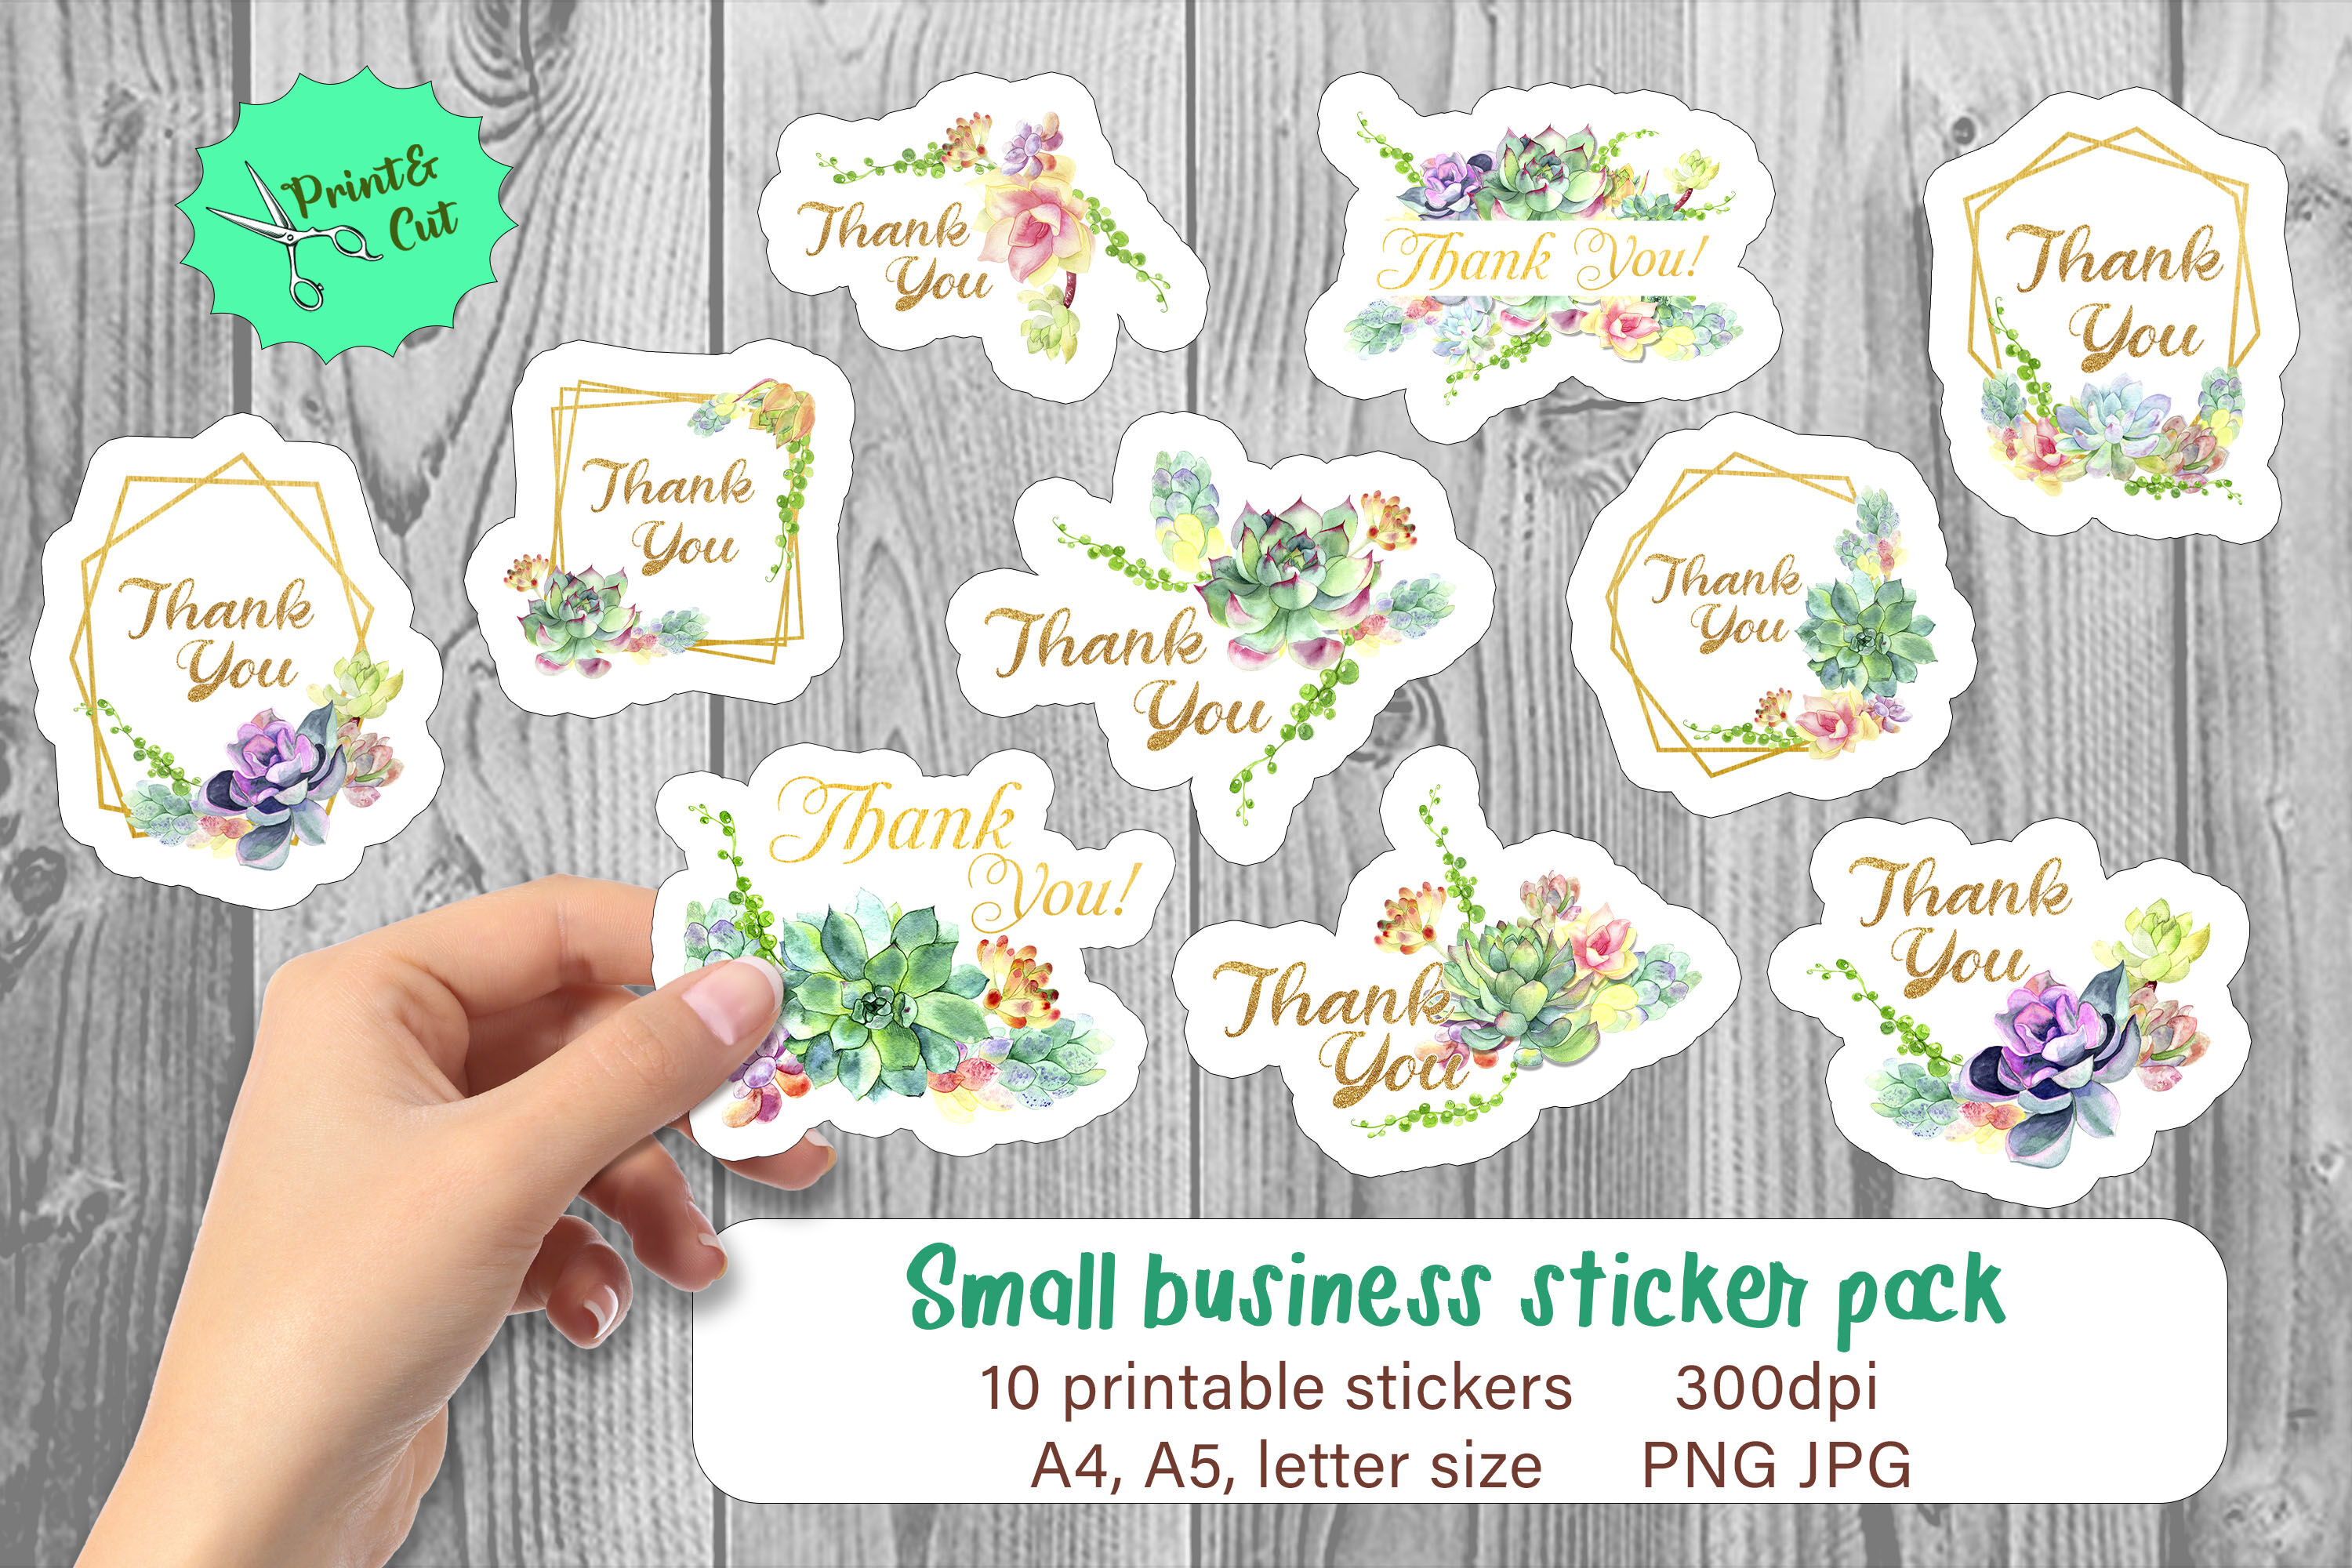 Thank you stickers PNG / Floral Small Business sticker pack By Shuneika